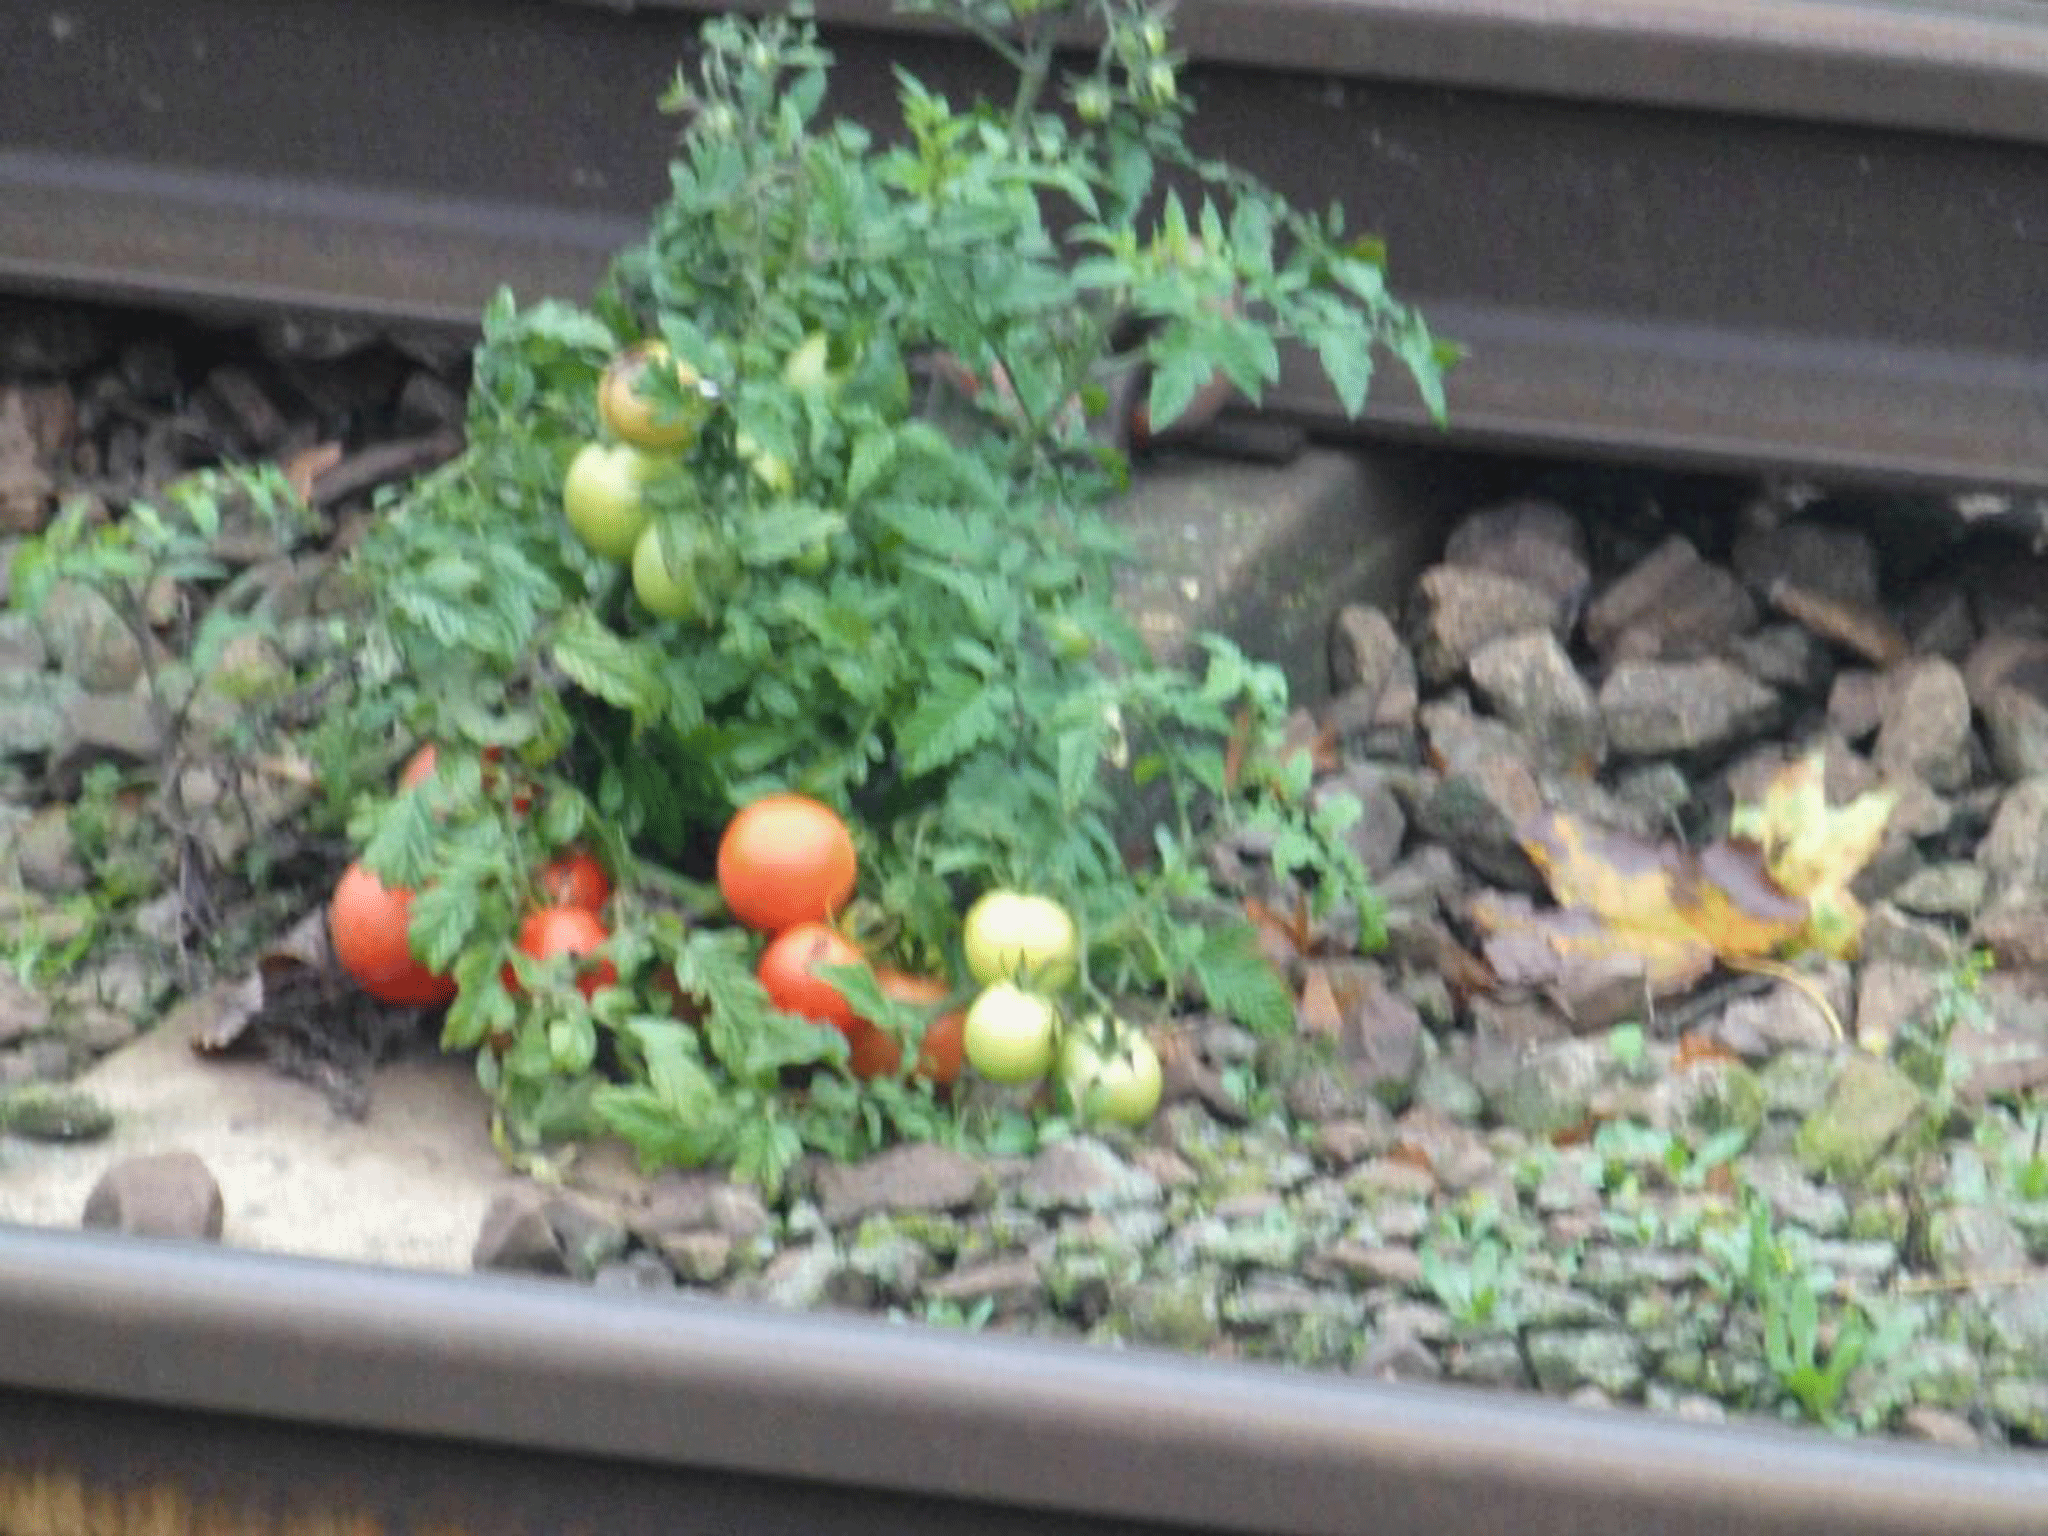 Tomatoes have been found growing in human waste dumped from trains on tracks in Essex